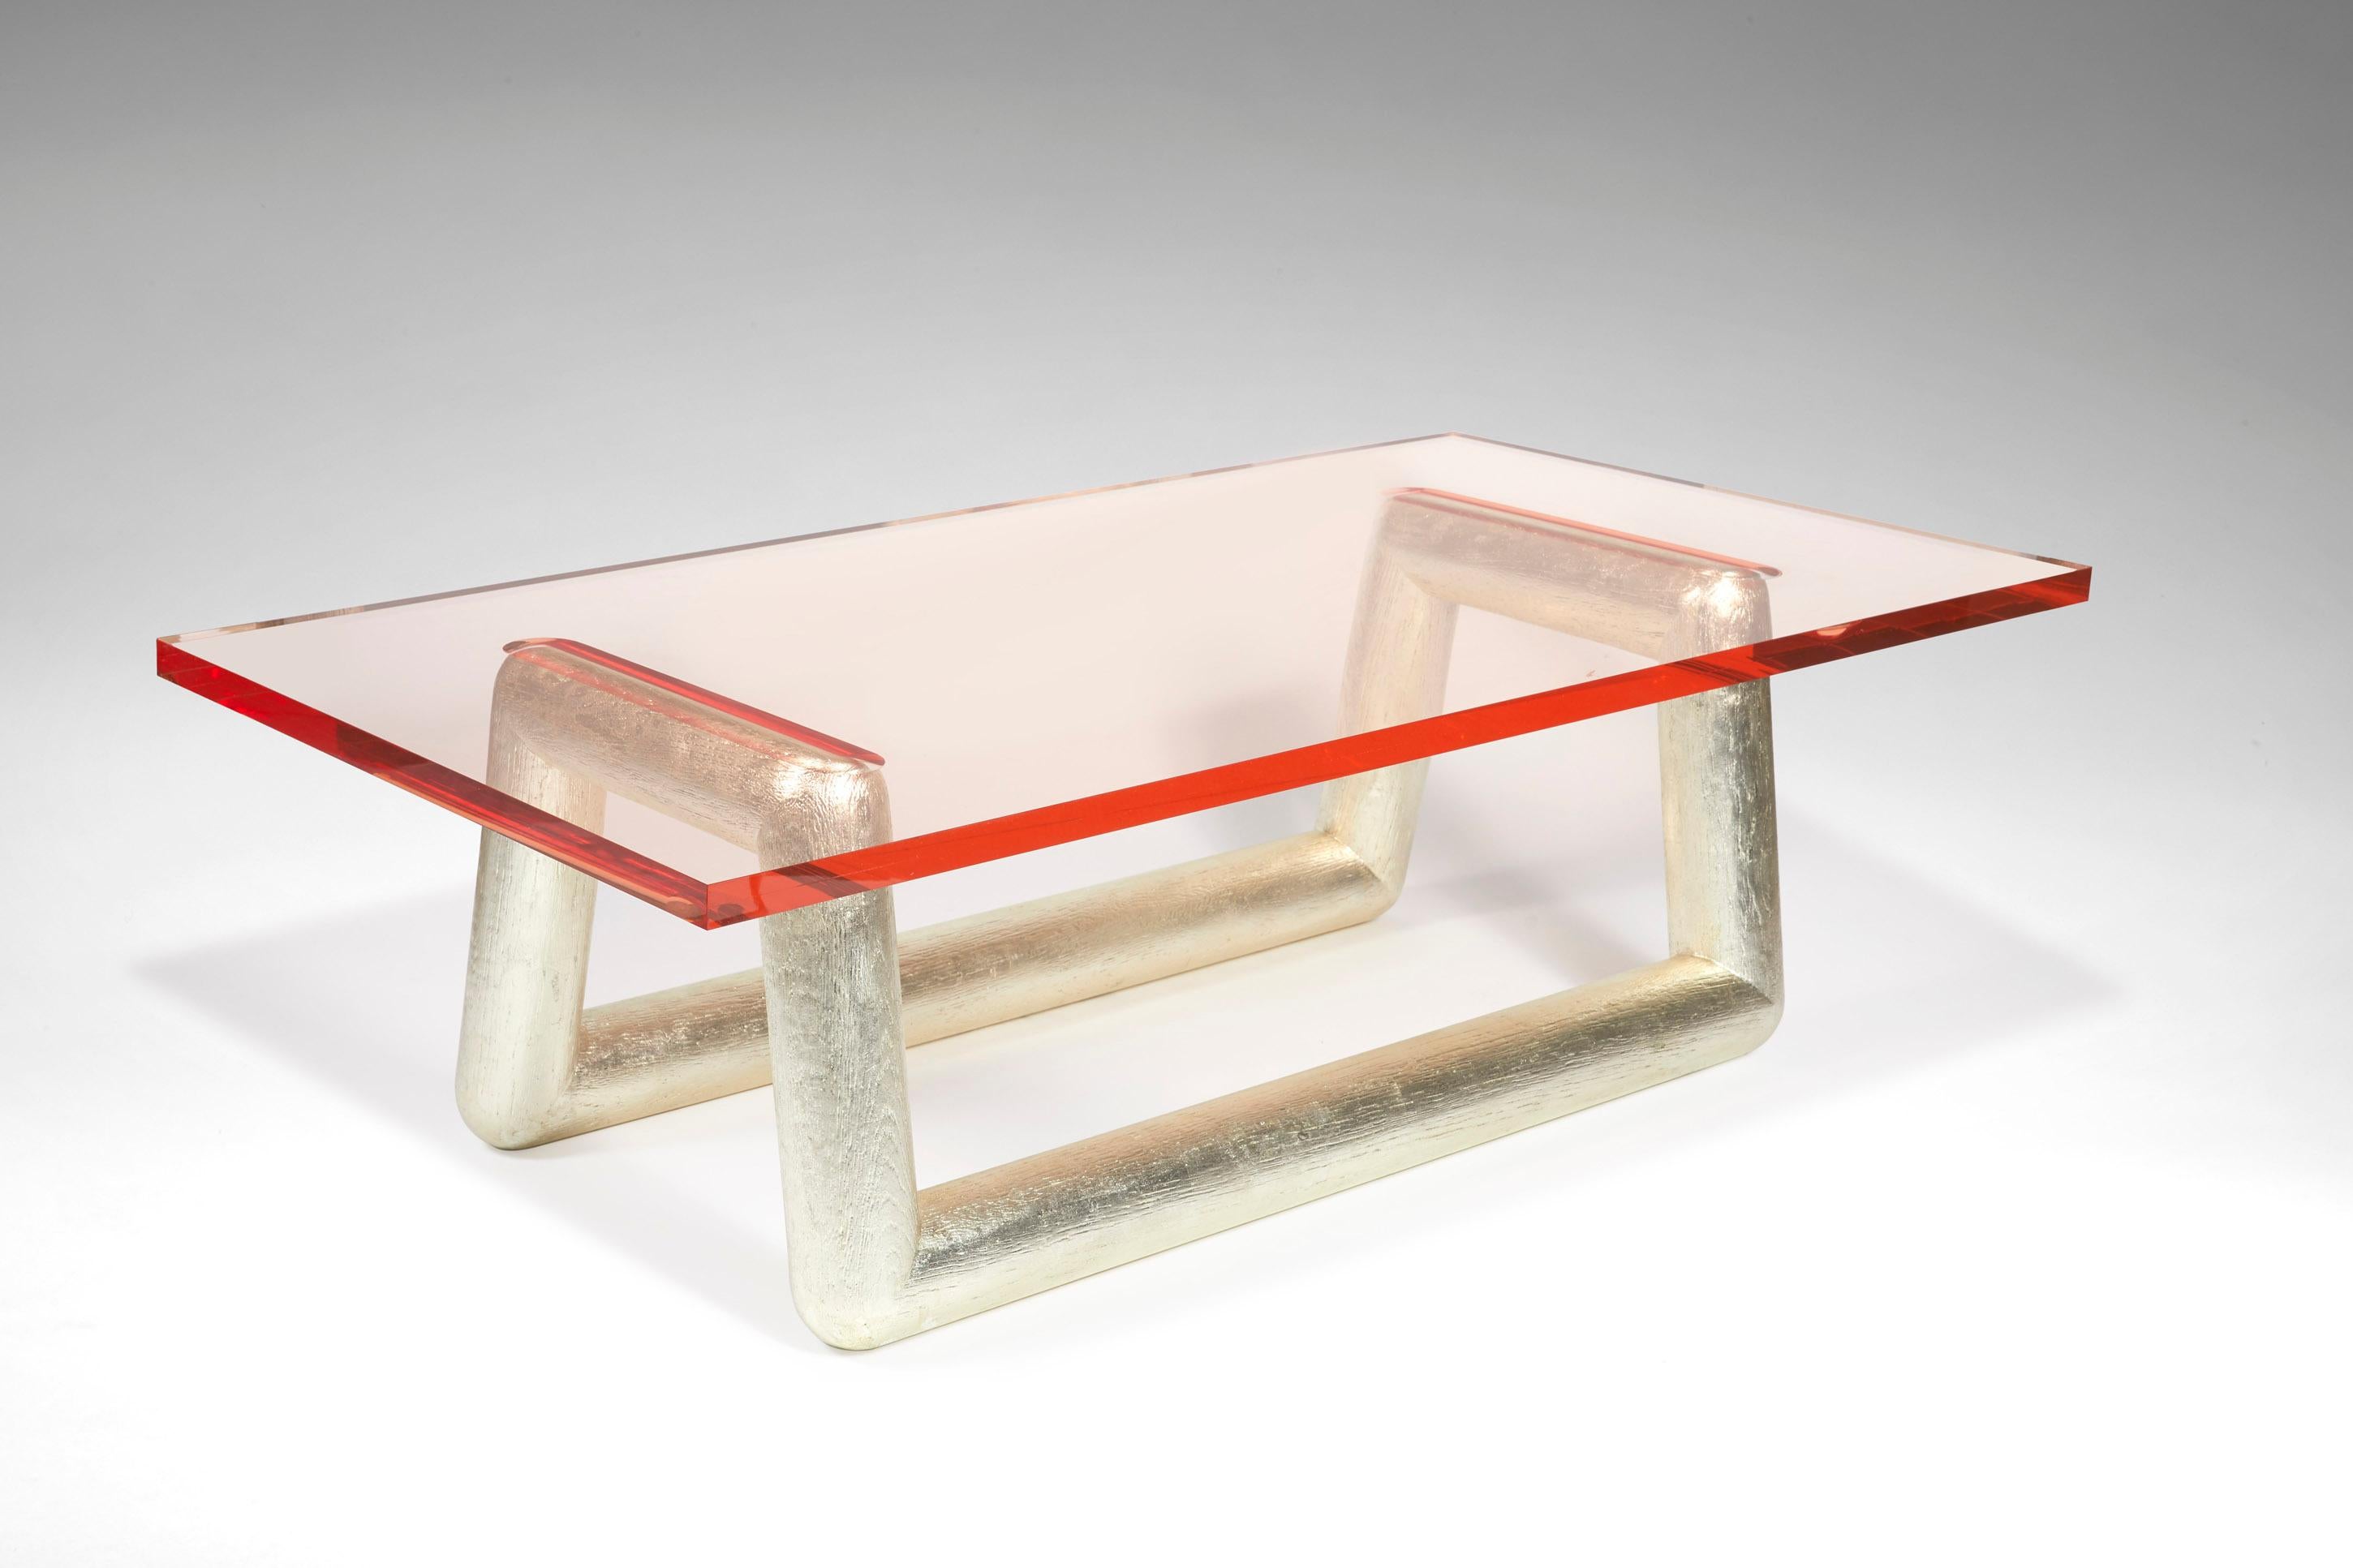 Jelly.
Cat-Berro edition, 2008.
Coffee table.
Top in transparent acrylic.
Legs in sanded oak covered with colored varnished aluminium leaves or golden leaves.
Measures: L 60’’. H 17’’. P 29 ½ ’’.
L 150cm. H 43cm. P 75cm.

Signed piece of a limited